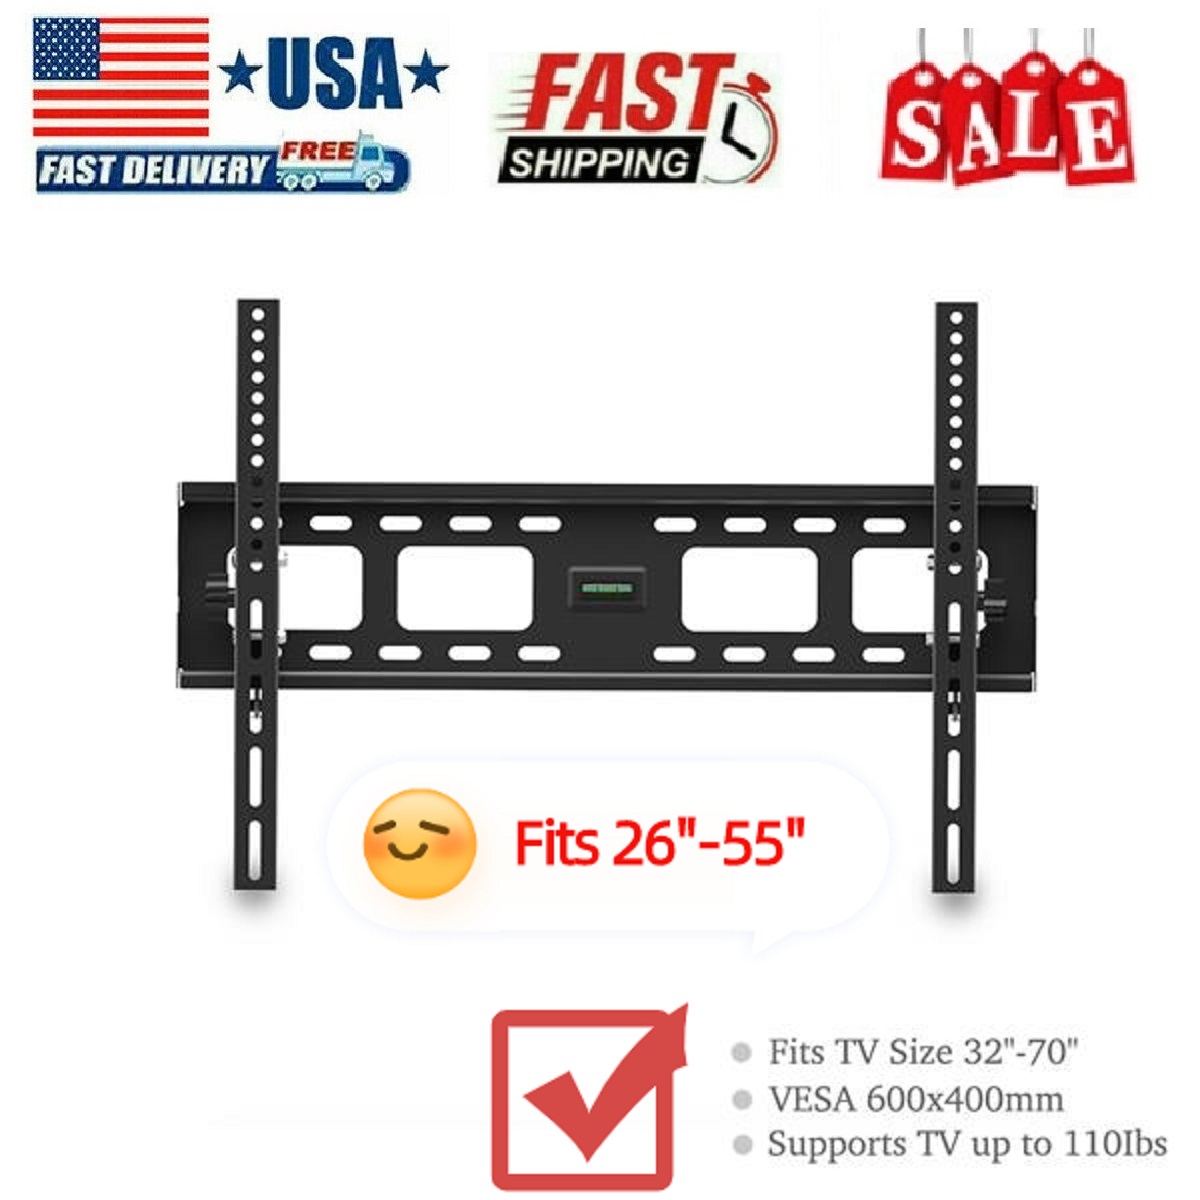 HOT SALES!Tv Wall Mount Adjustable TV Wall Mount - Tilting TV Mounting Brackets Fit 32, 40, 42, 46, 50, 55, 65,70 Inch Plasma Flat Screen TV with Spirit Level Load Capacity 50kg TMW600 - image 1 of 15